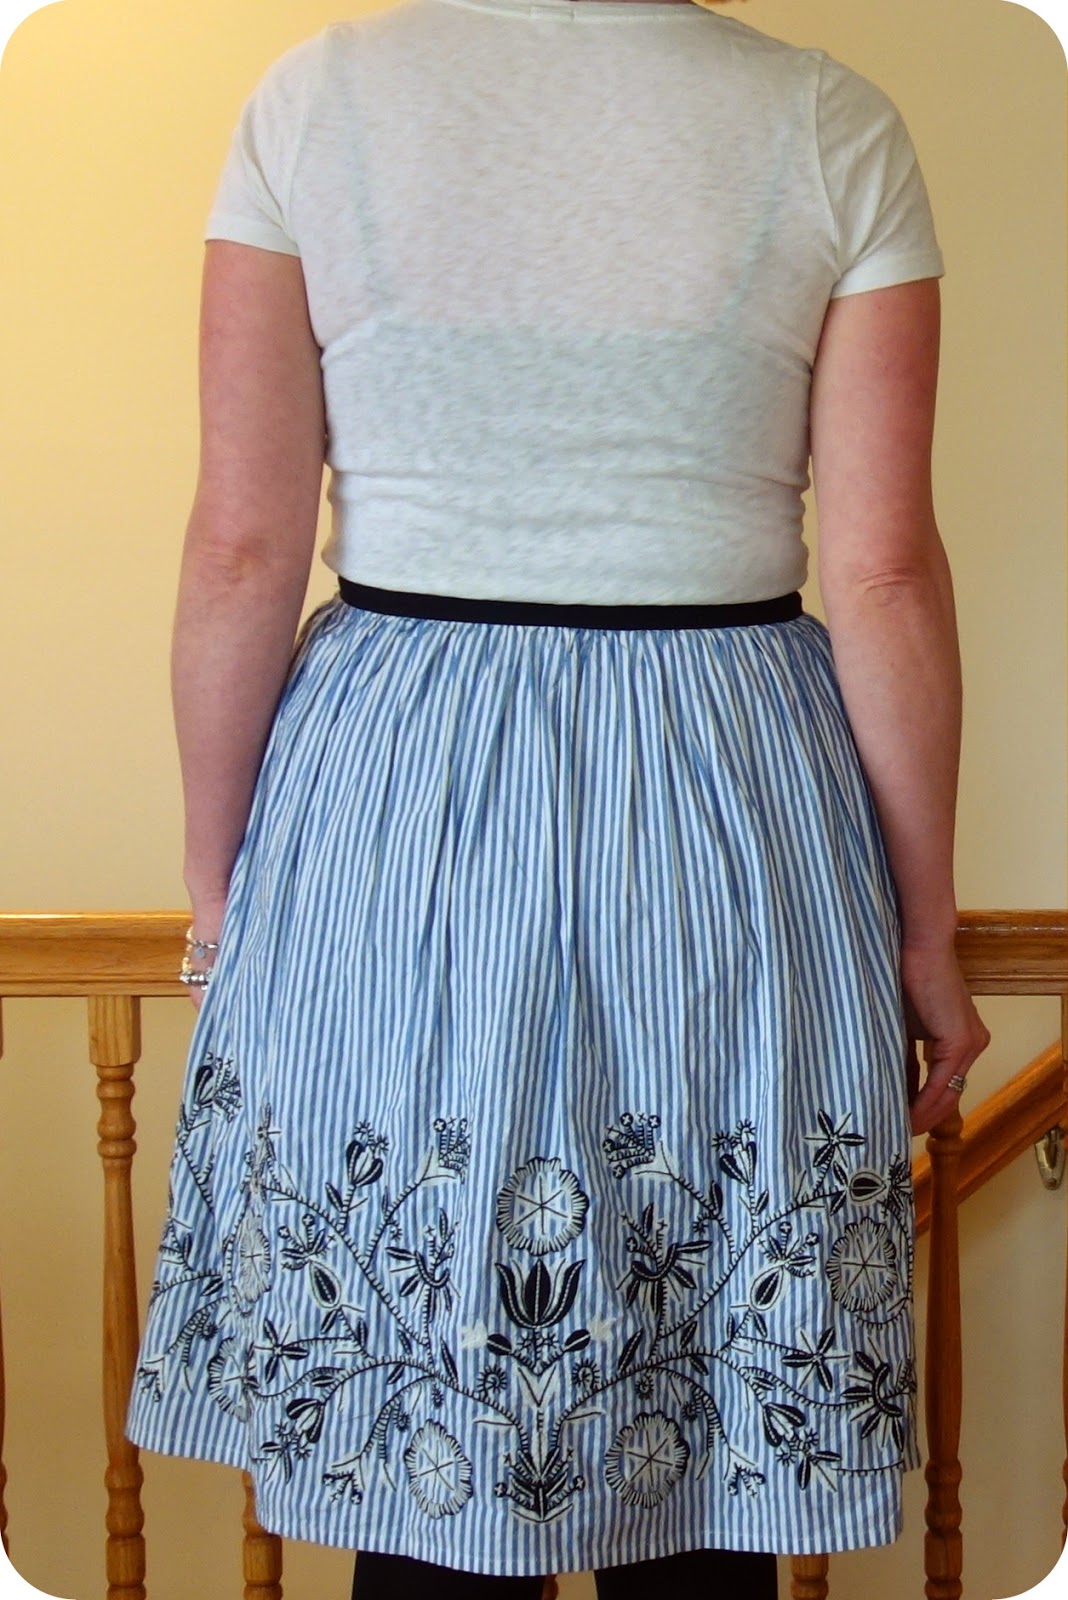 My Superfluities: Boden Weekly Review Roundup: Emily, Her Skirt, and My ...